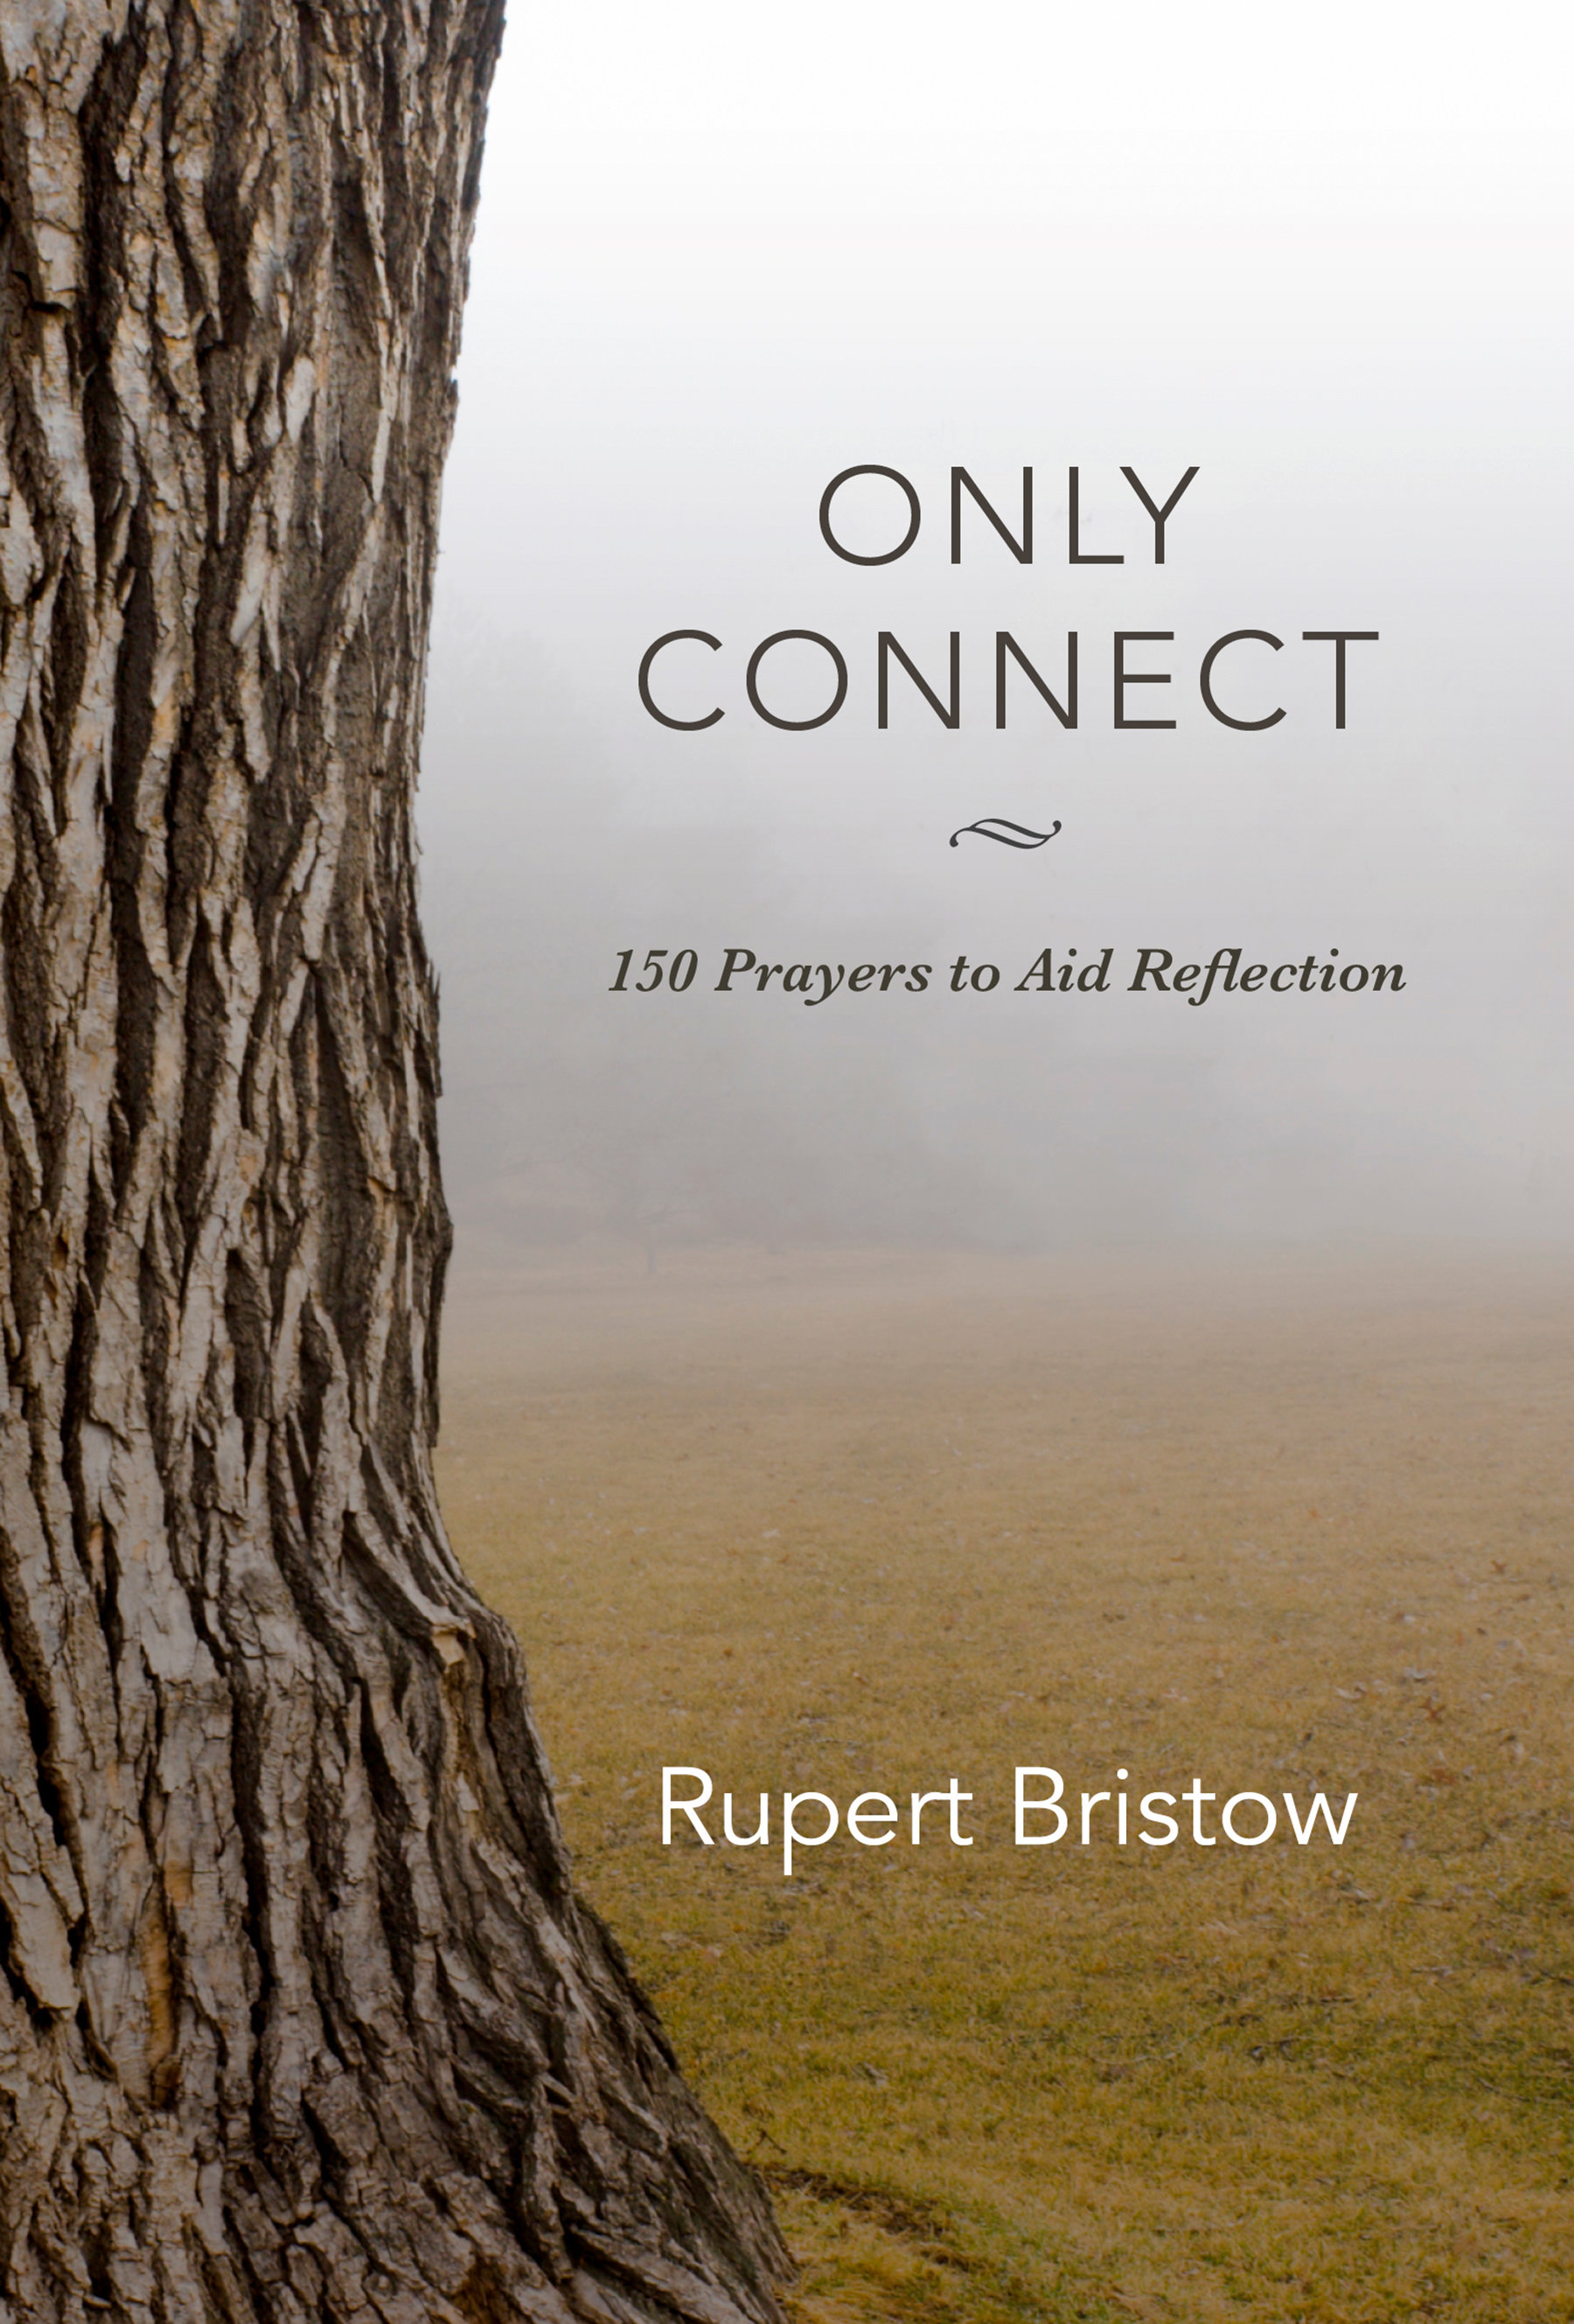 Only Connect: 150 Prayers to Aid Reflection